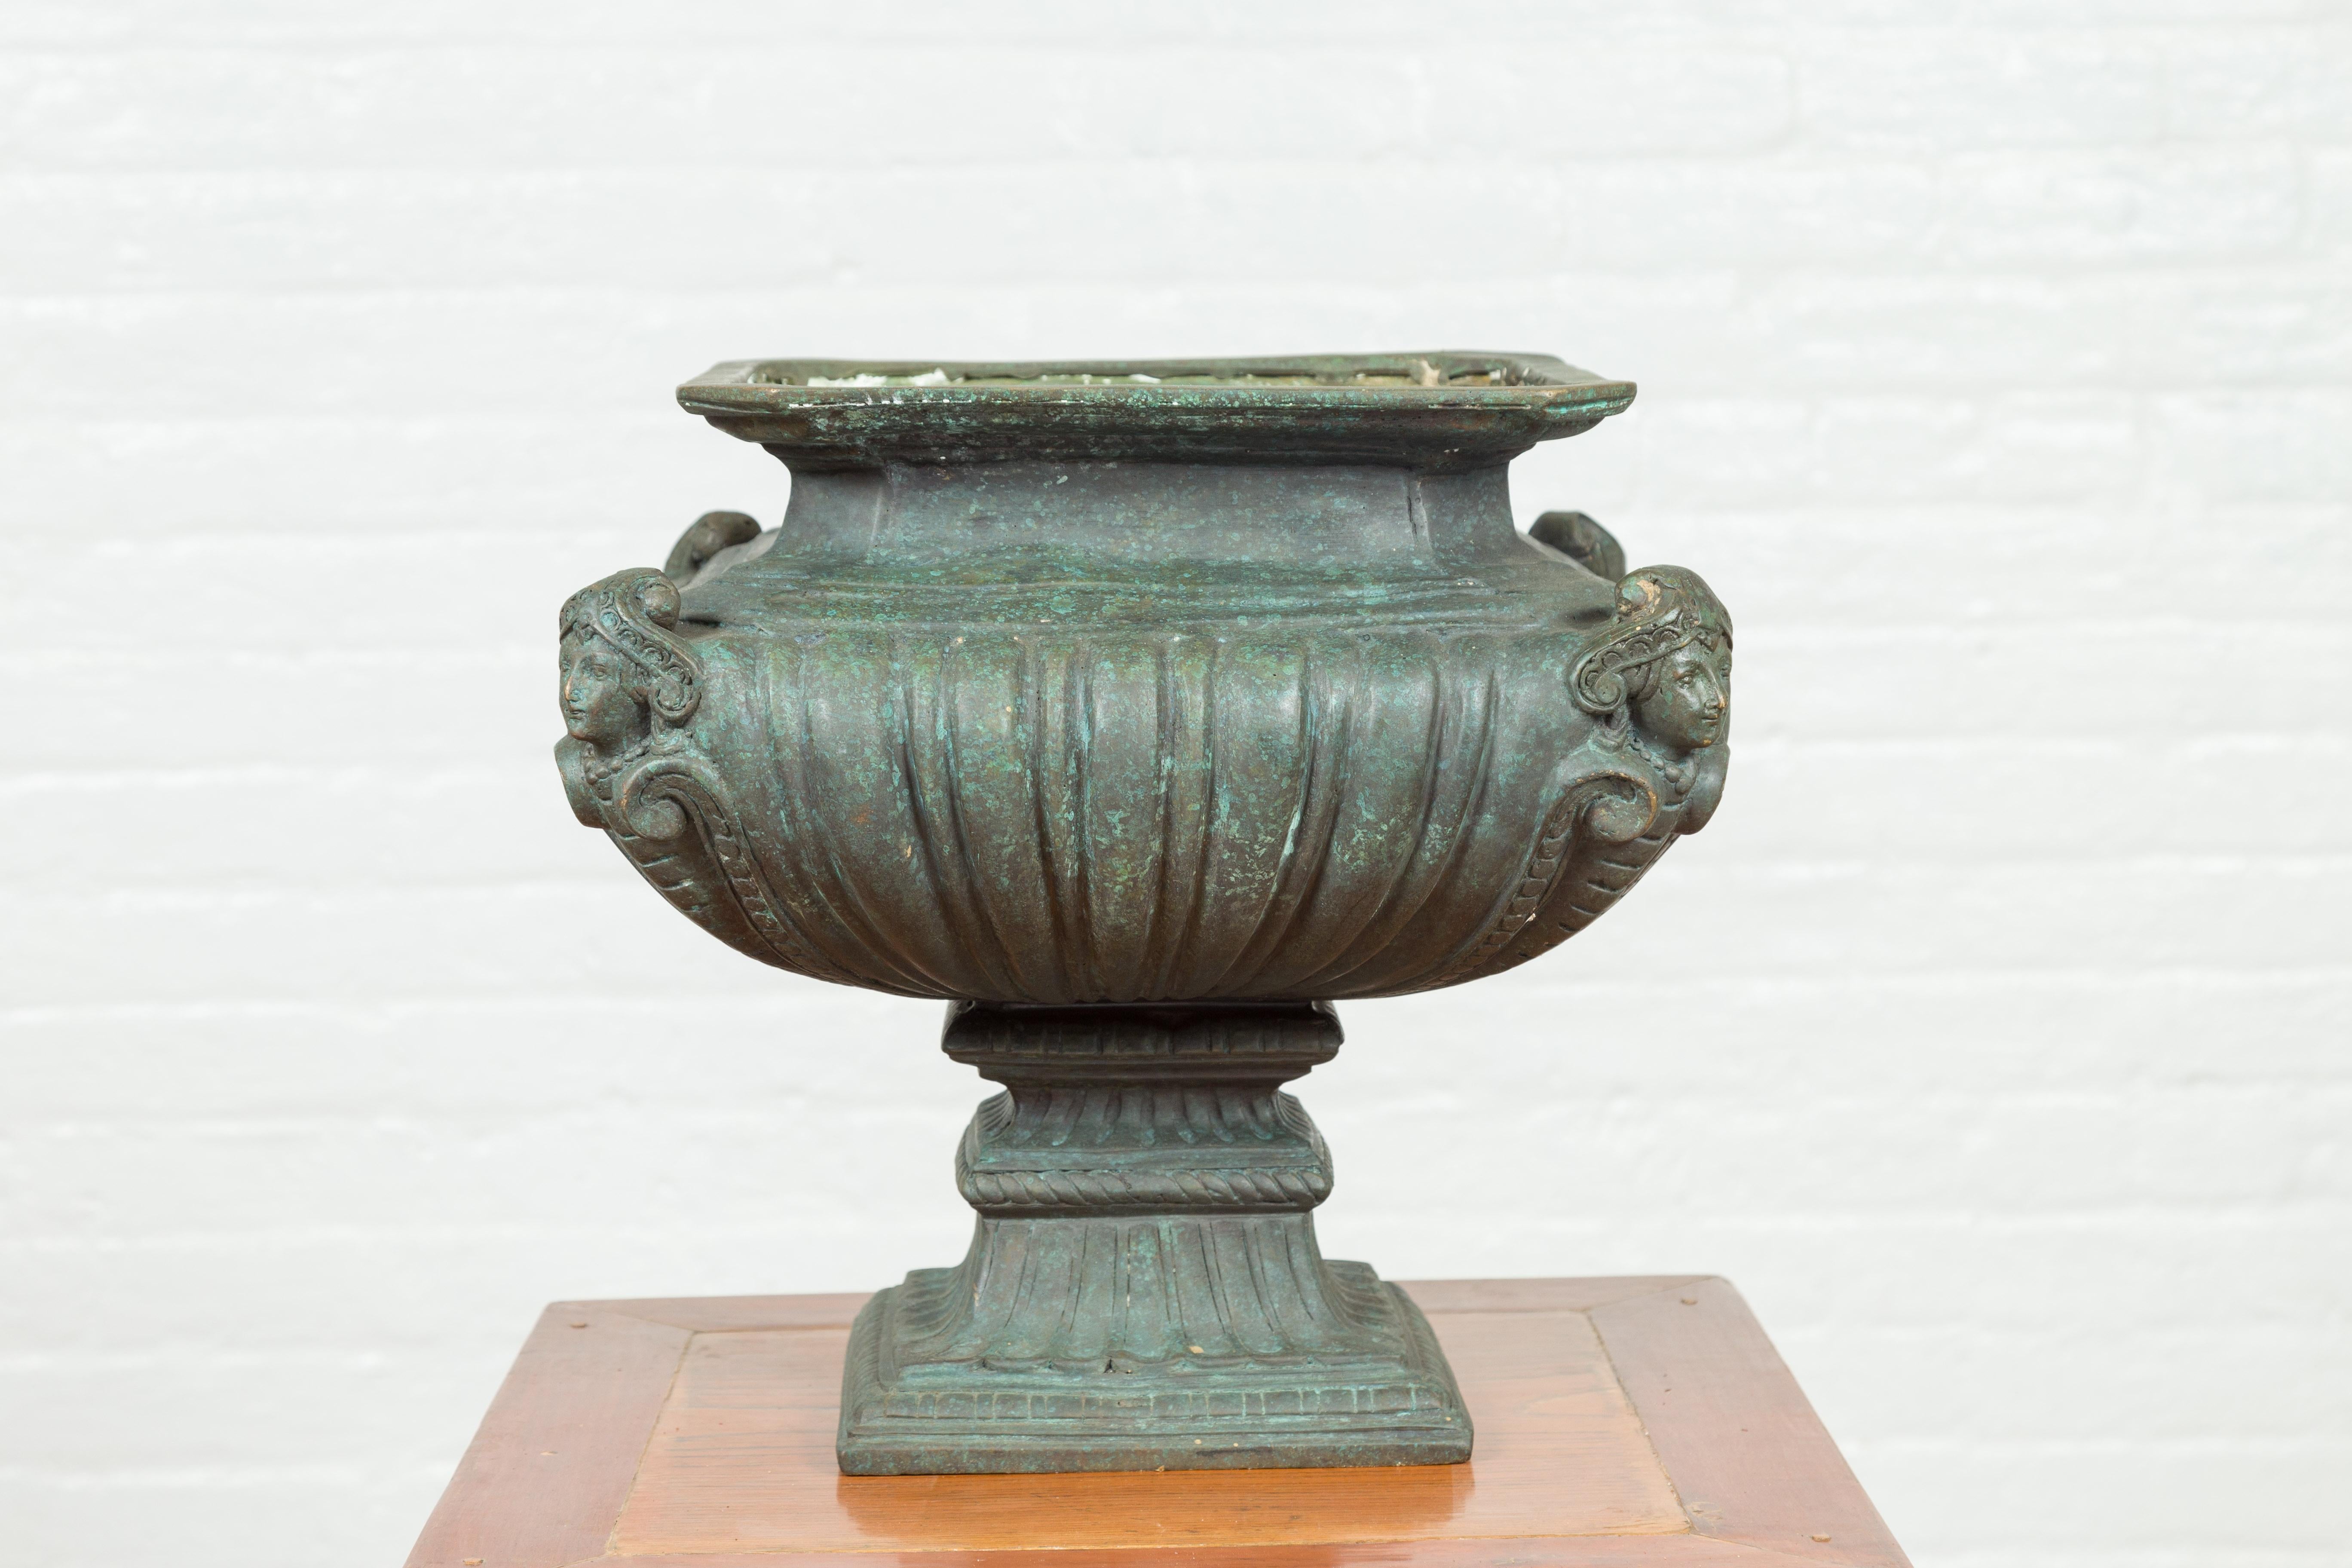 Contemporary Cast Bronze Planter with Figures, Gadroon Motifs and Verde Patina In Good Condition For Sale In Yonkers, NY